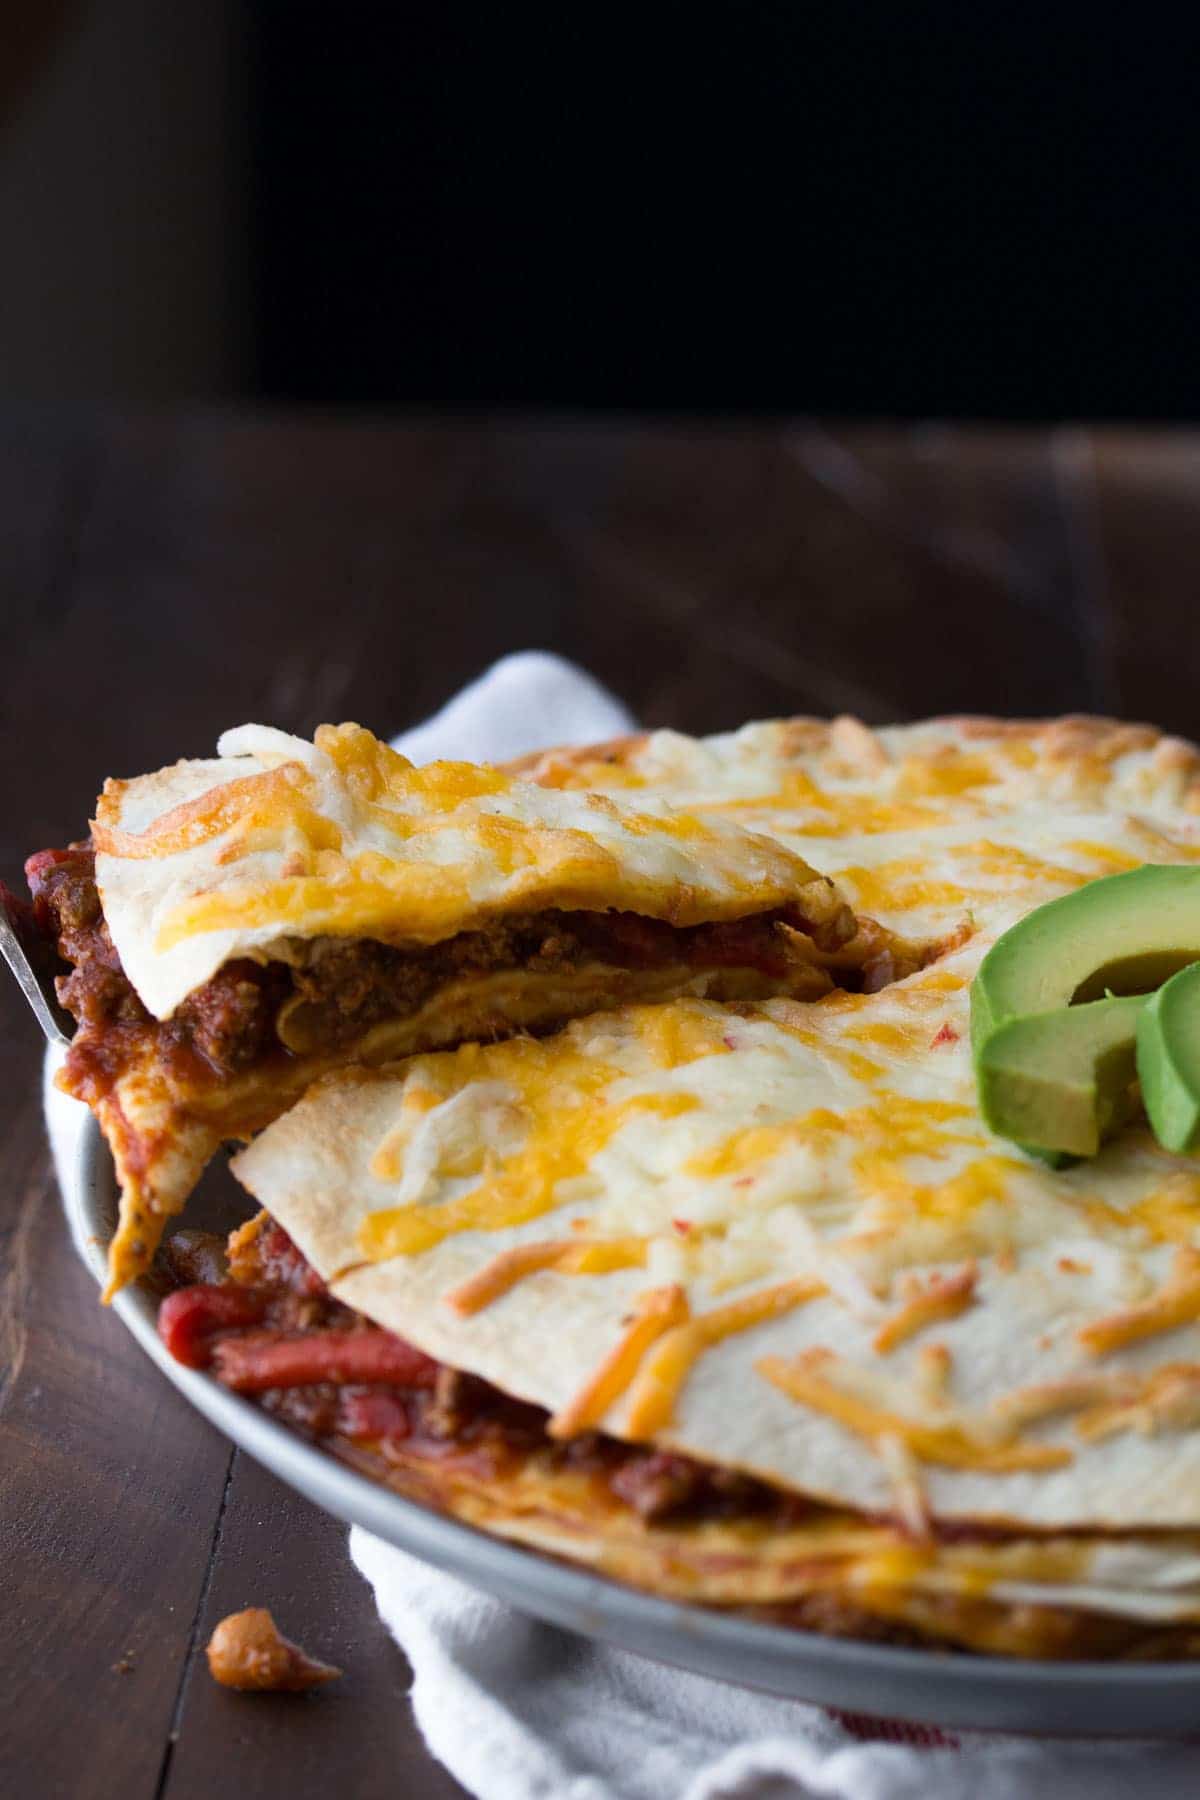 A fast and easy tortilla stack recipe that spreads leftover chili between tortillas with cheese. Ready in 25 minutes, and makes for an awesome weeknight dinner and packed lunch the next day!